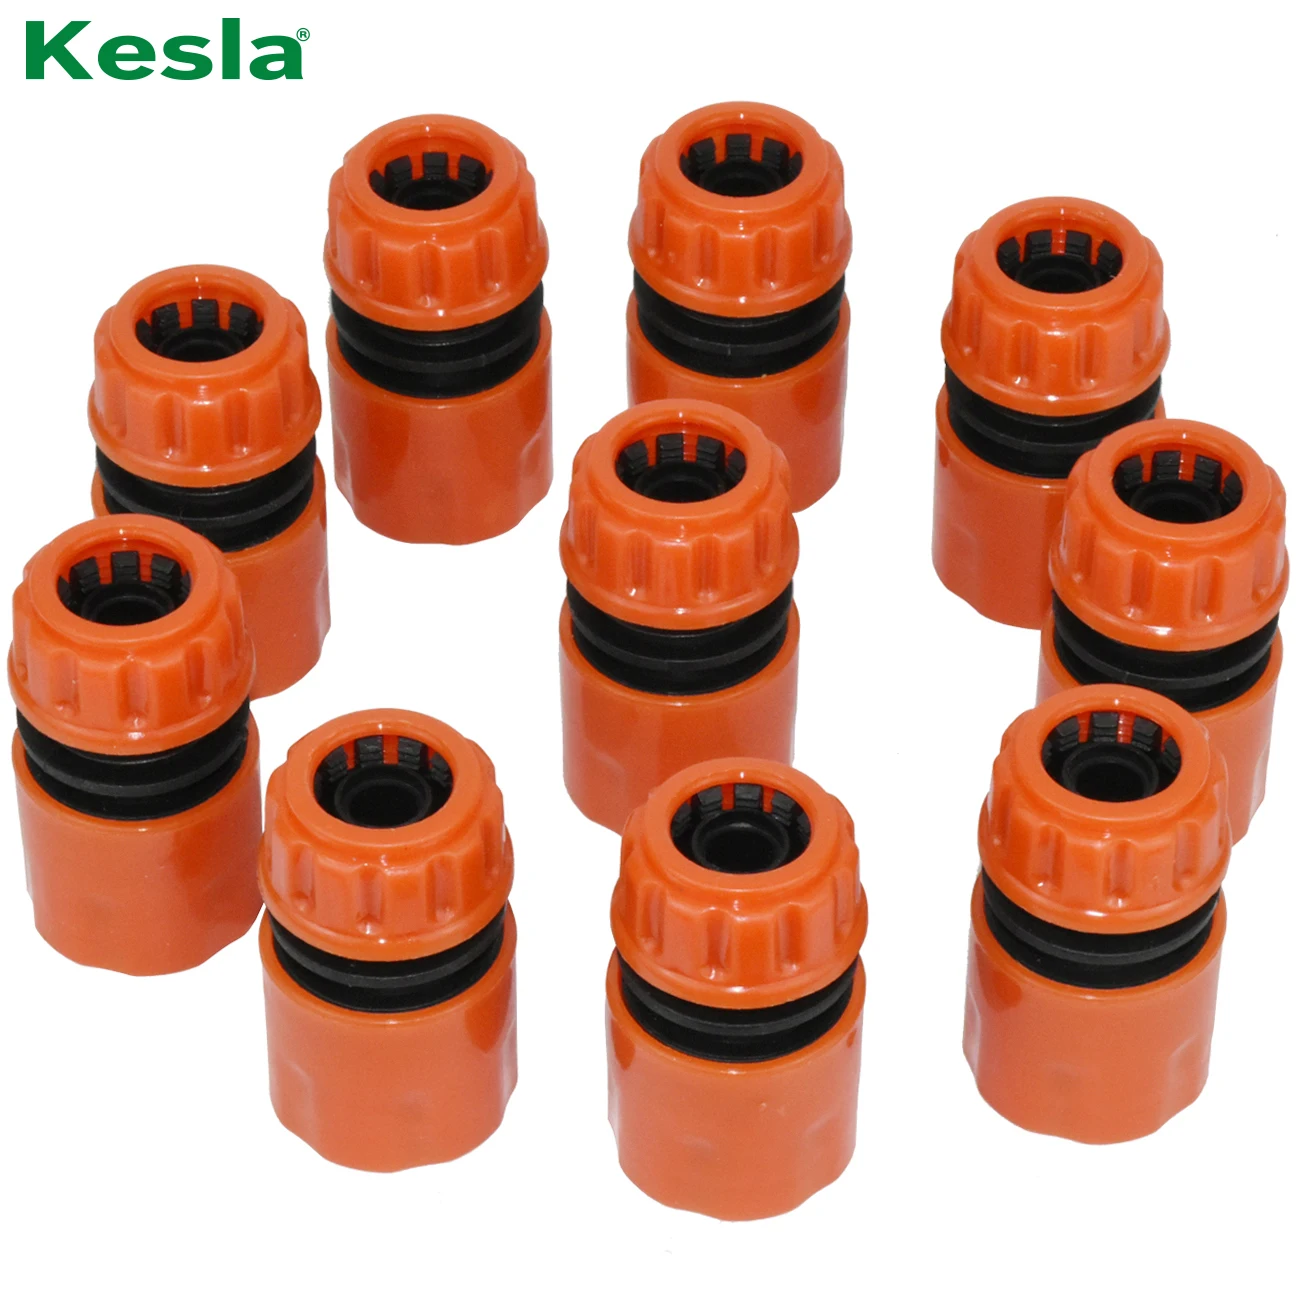 KESLA 10PCS 16mm Hose Quick Connector Garden Water Hose Pipe 1/2 inch Tap Adapter Repair Extension Fitting Watering Greenhouse